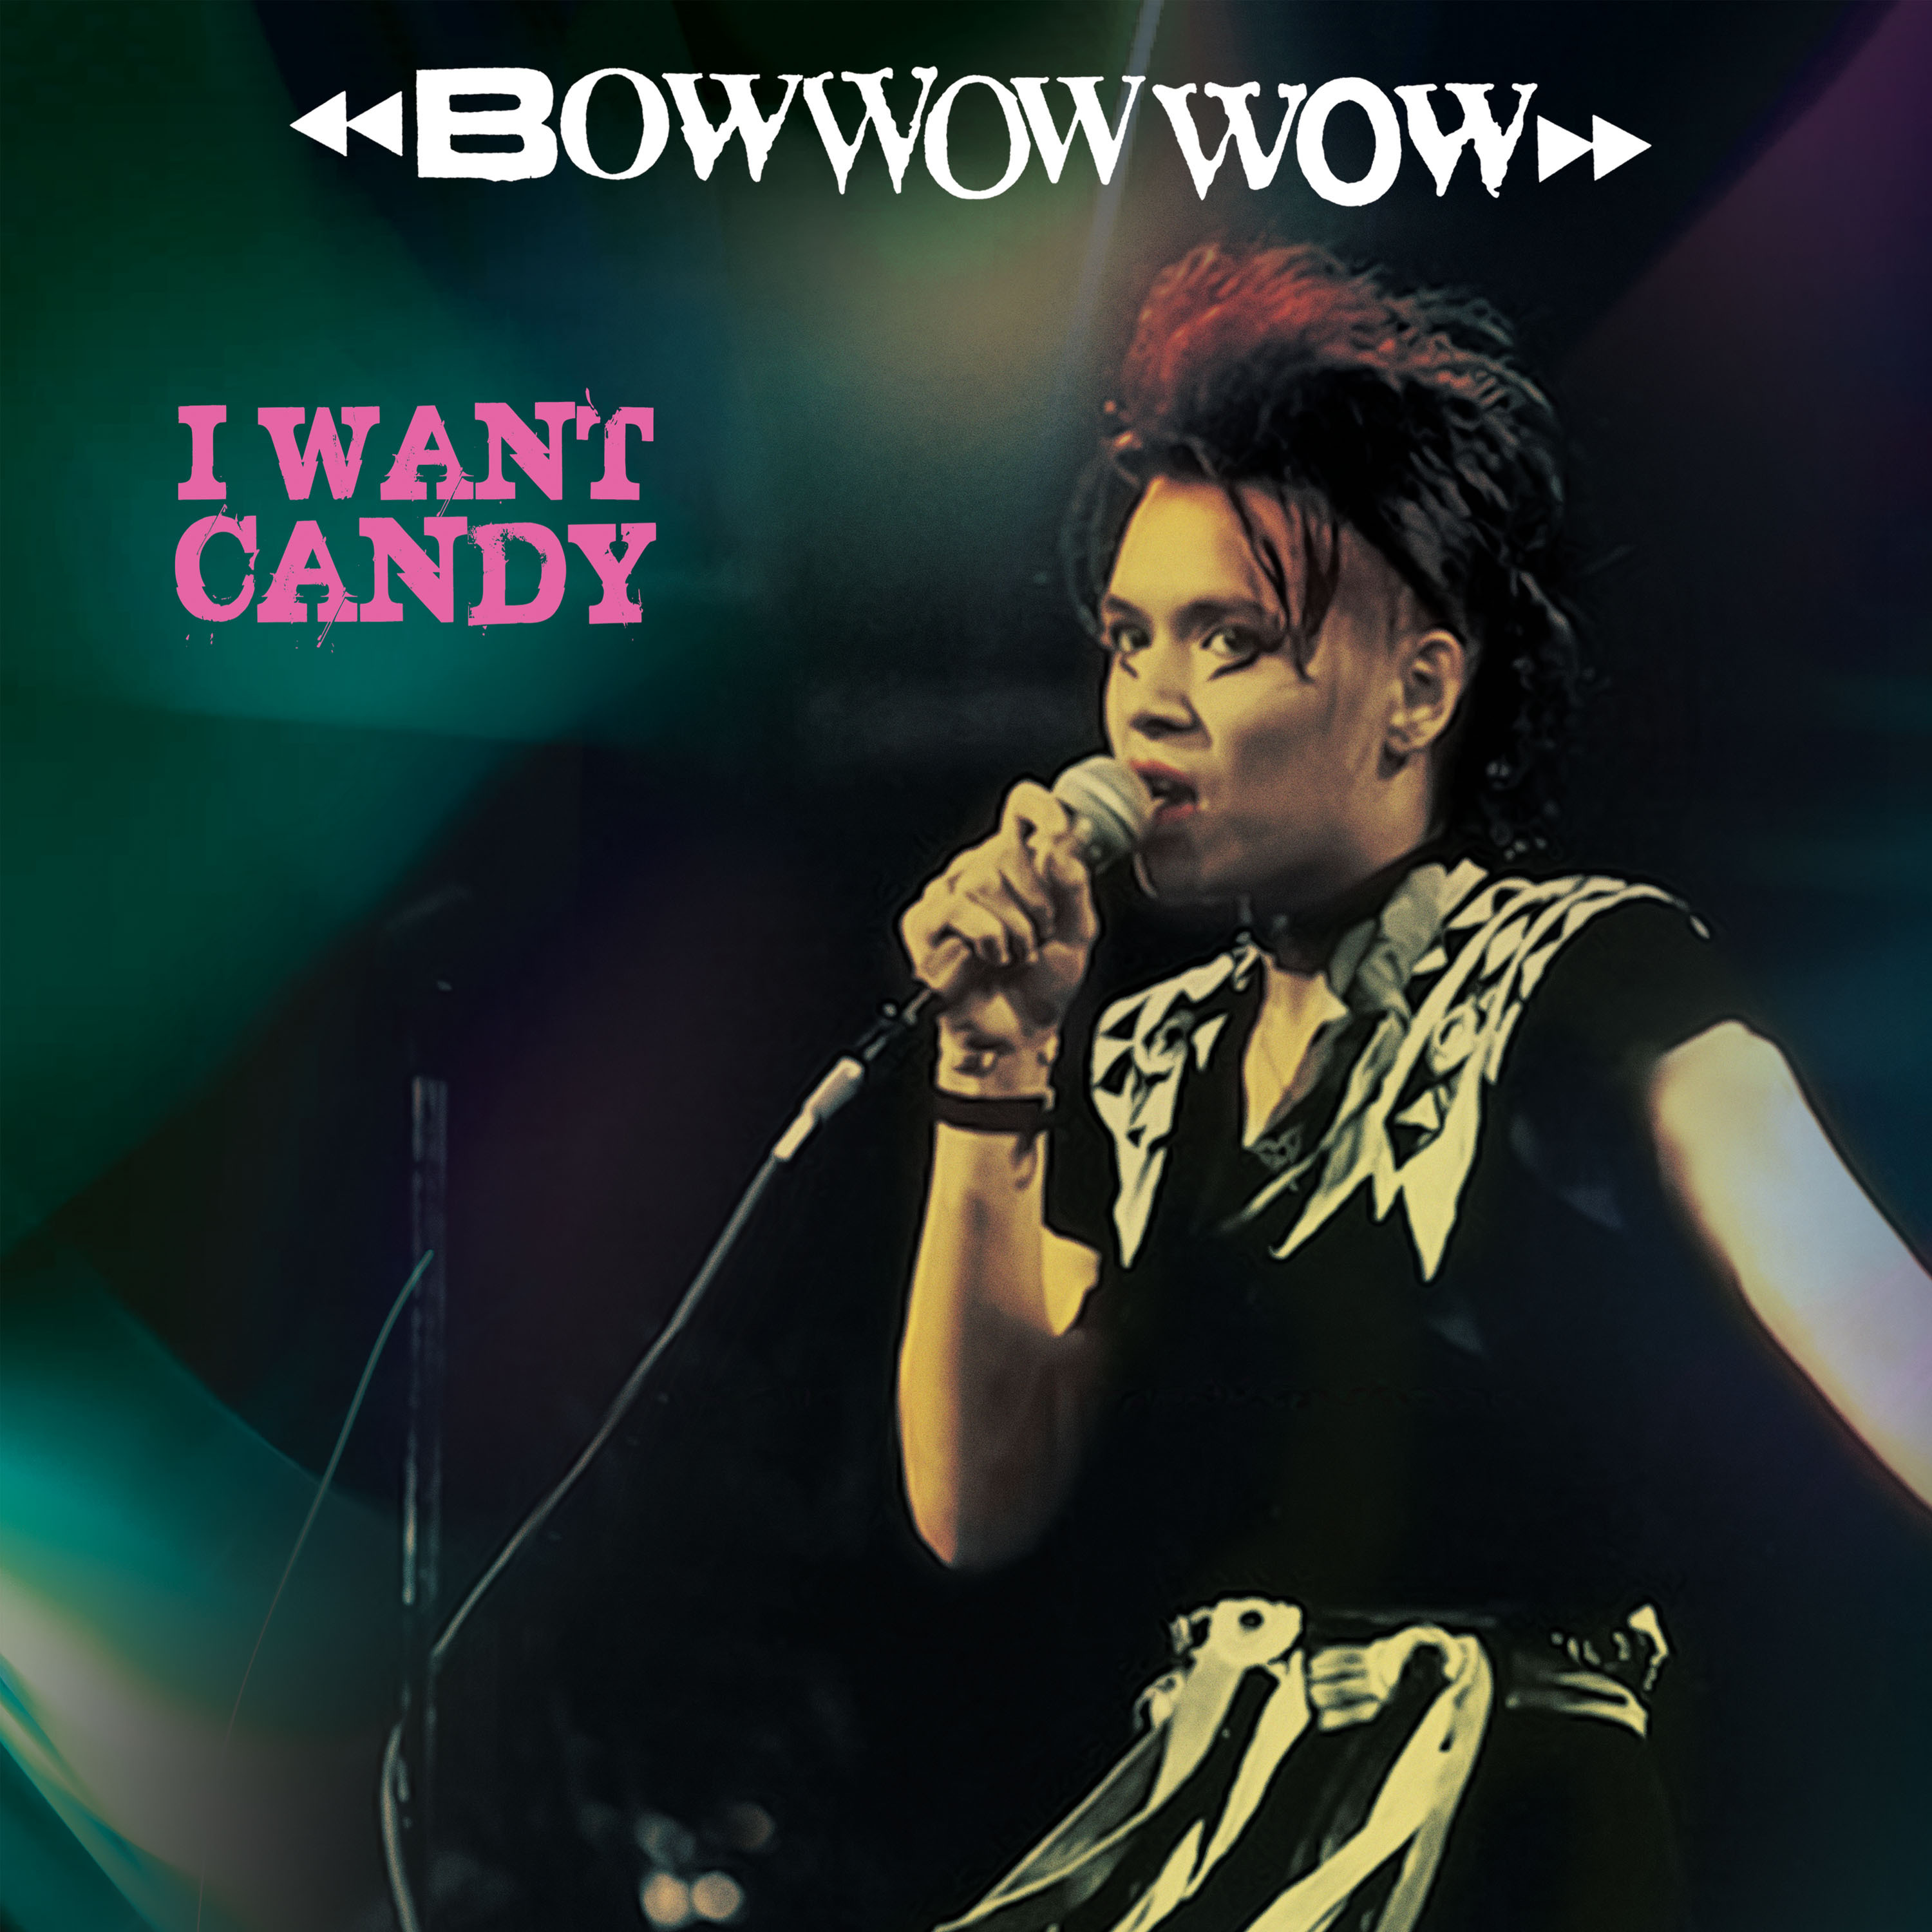 I Want Candy|Bow Wow Wow